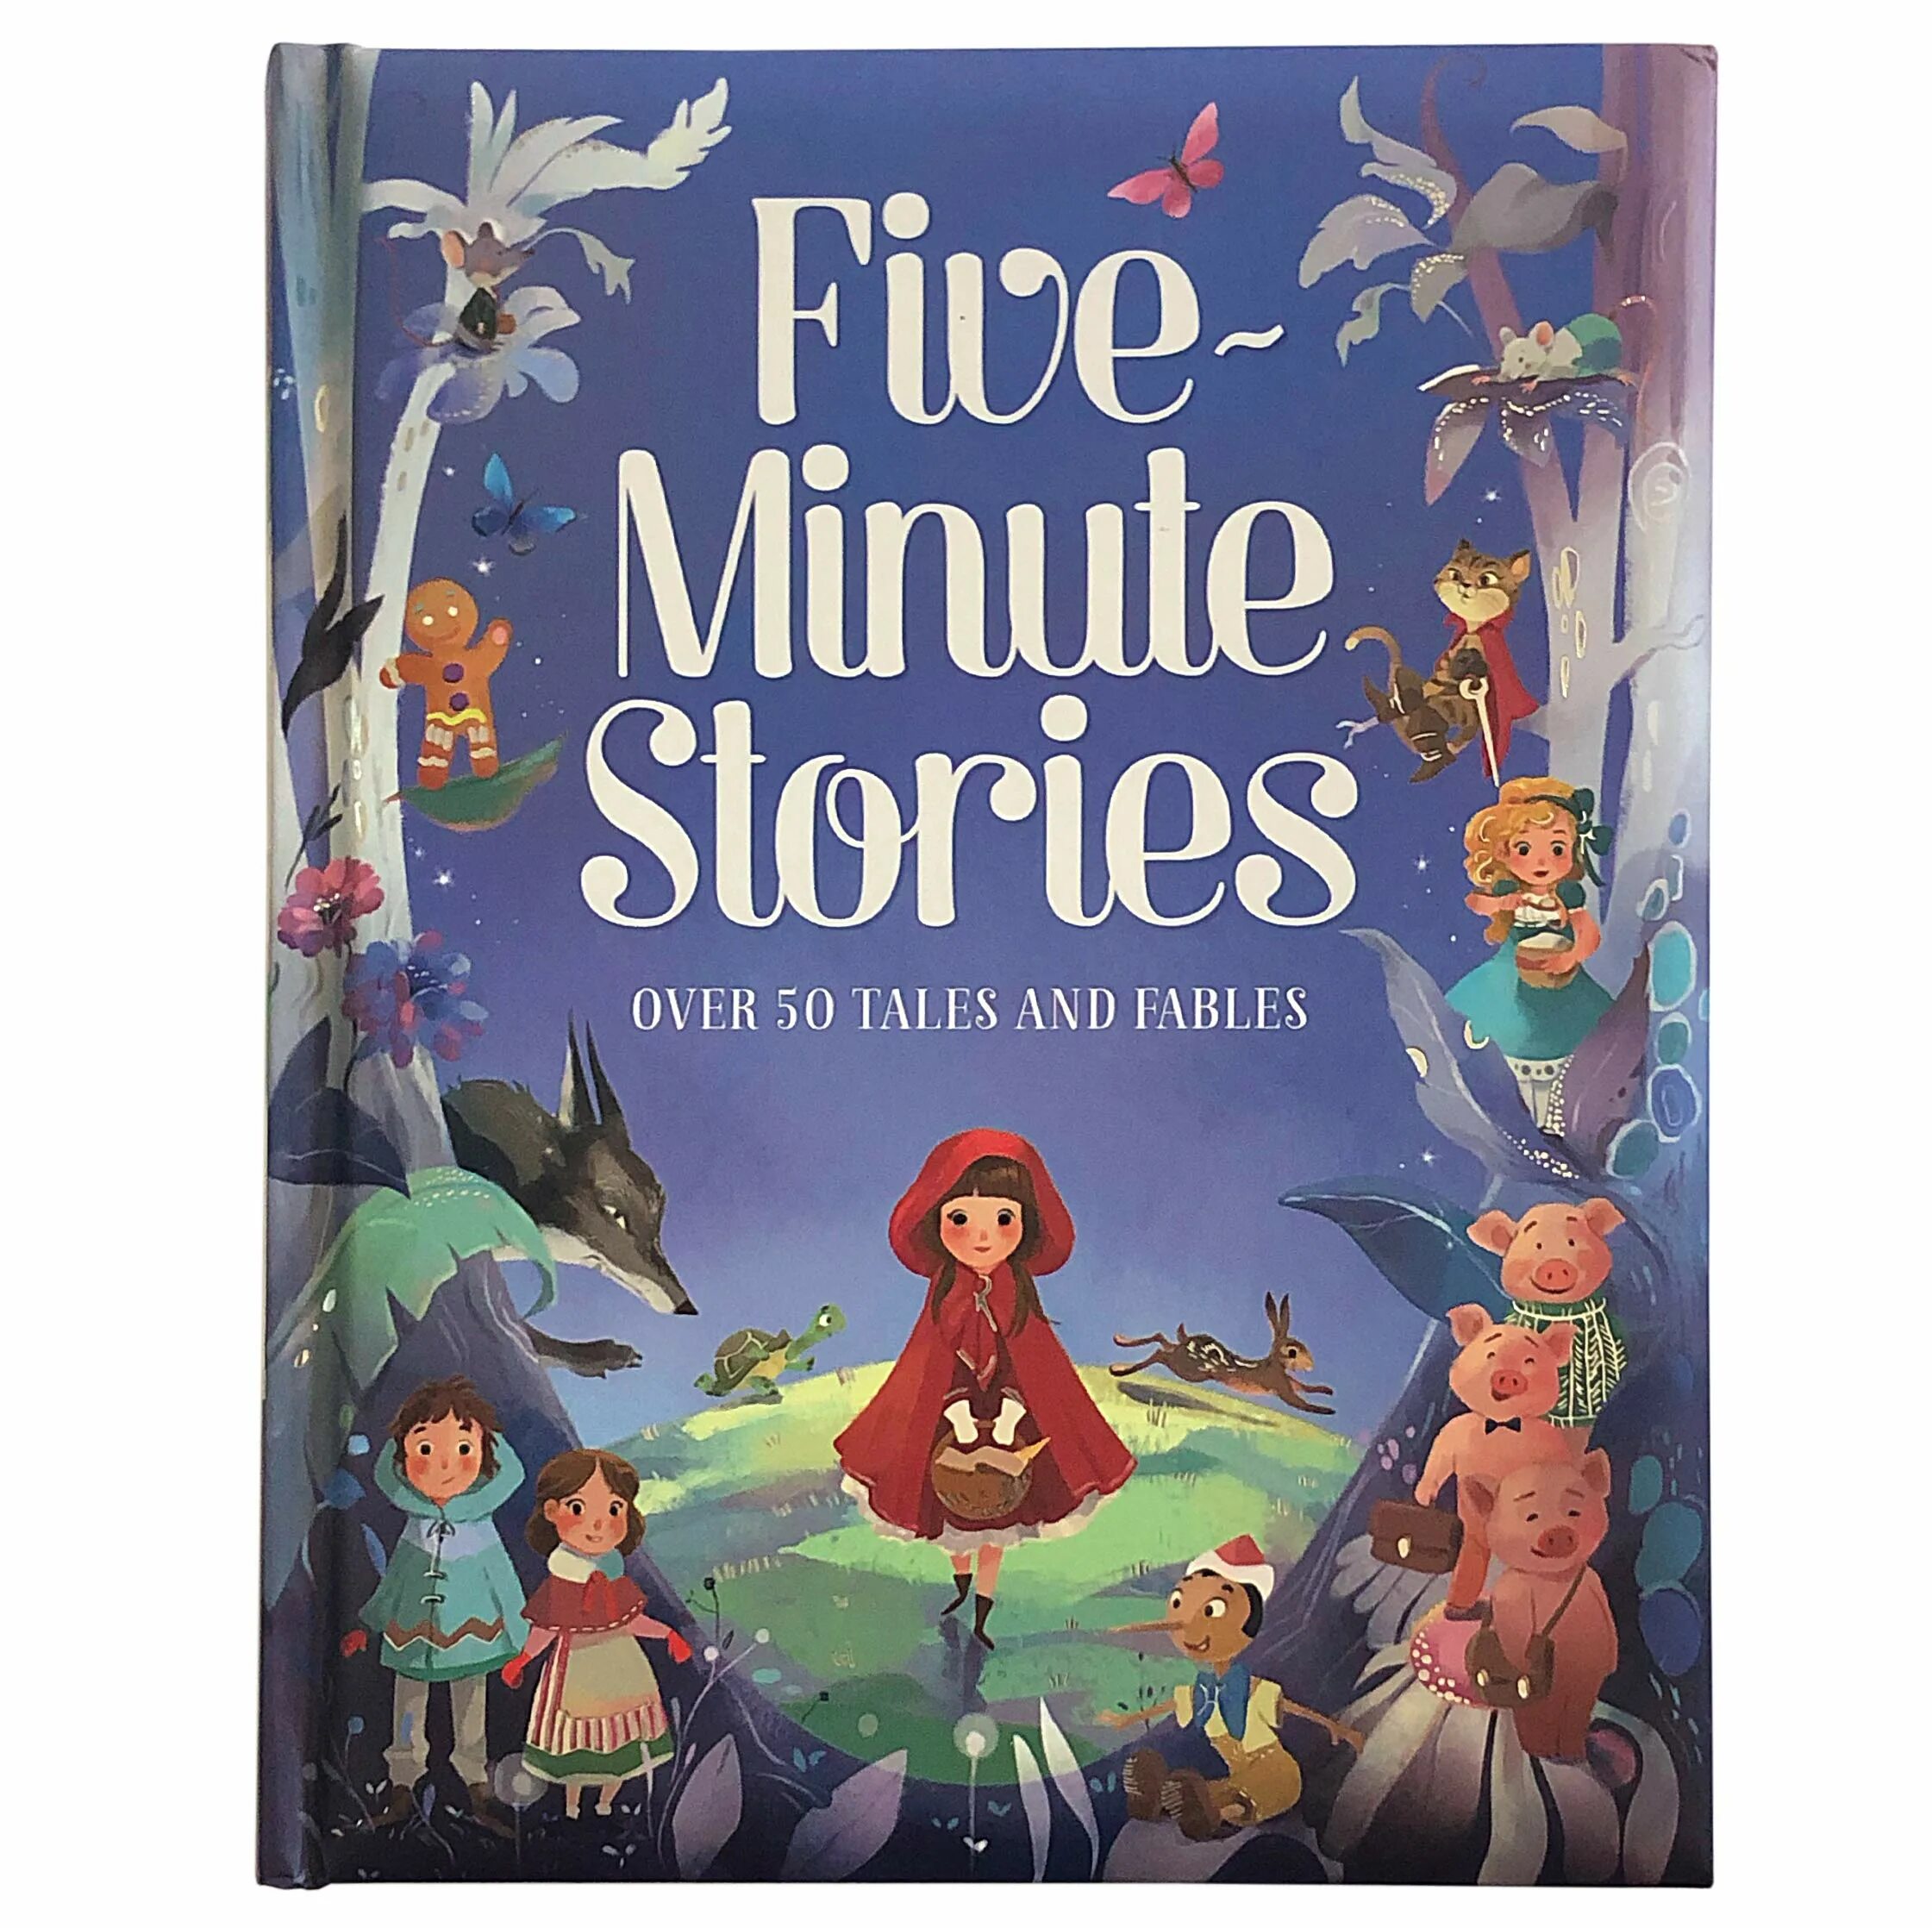 365 Bedtime stories and Rhymes. СЕНСОРИ стори книга. 5 Minutes stories Disney. S. Mikhalkov 'poems, Fables and Fairy Tales' pdf.